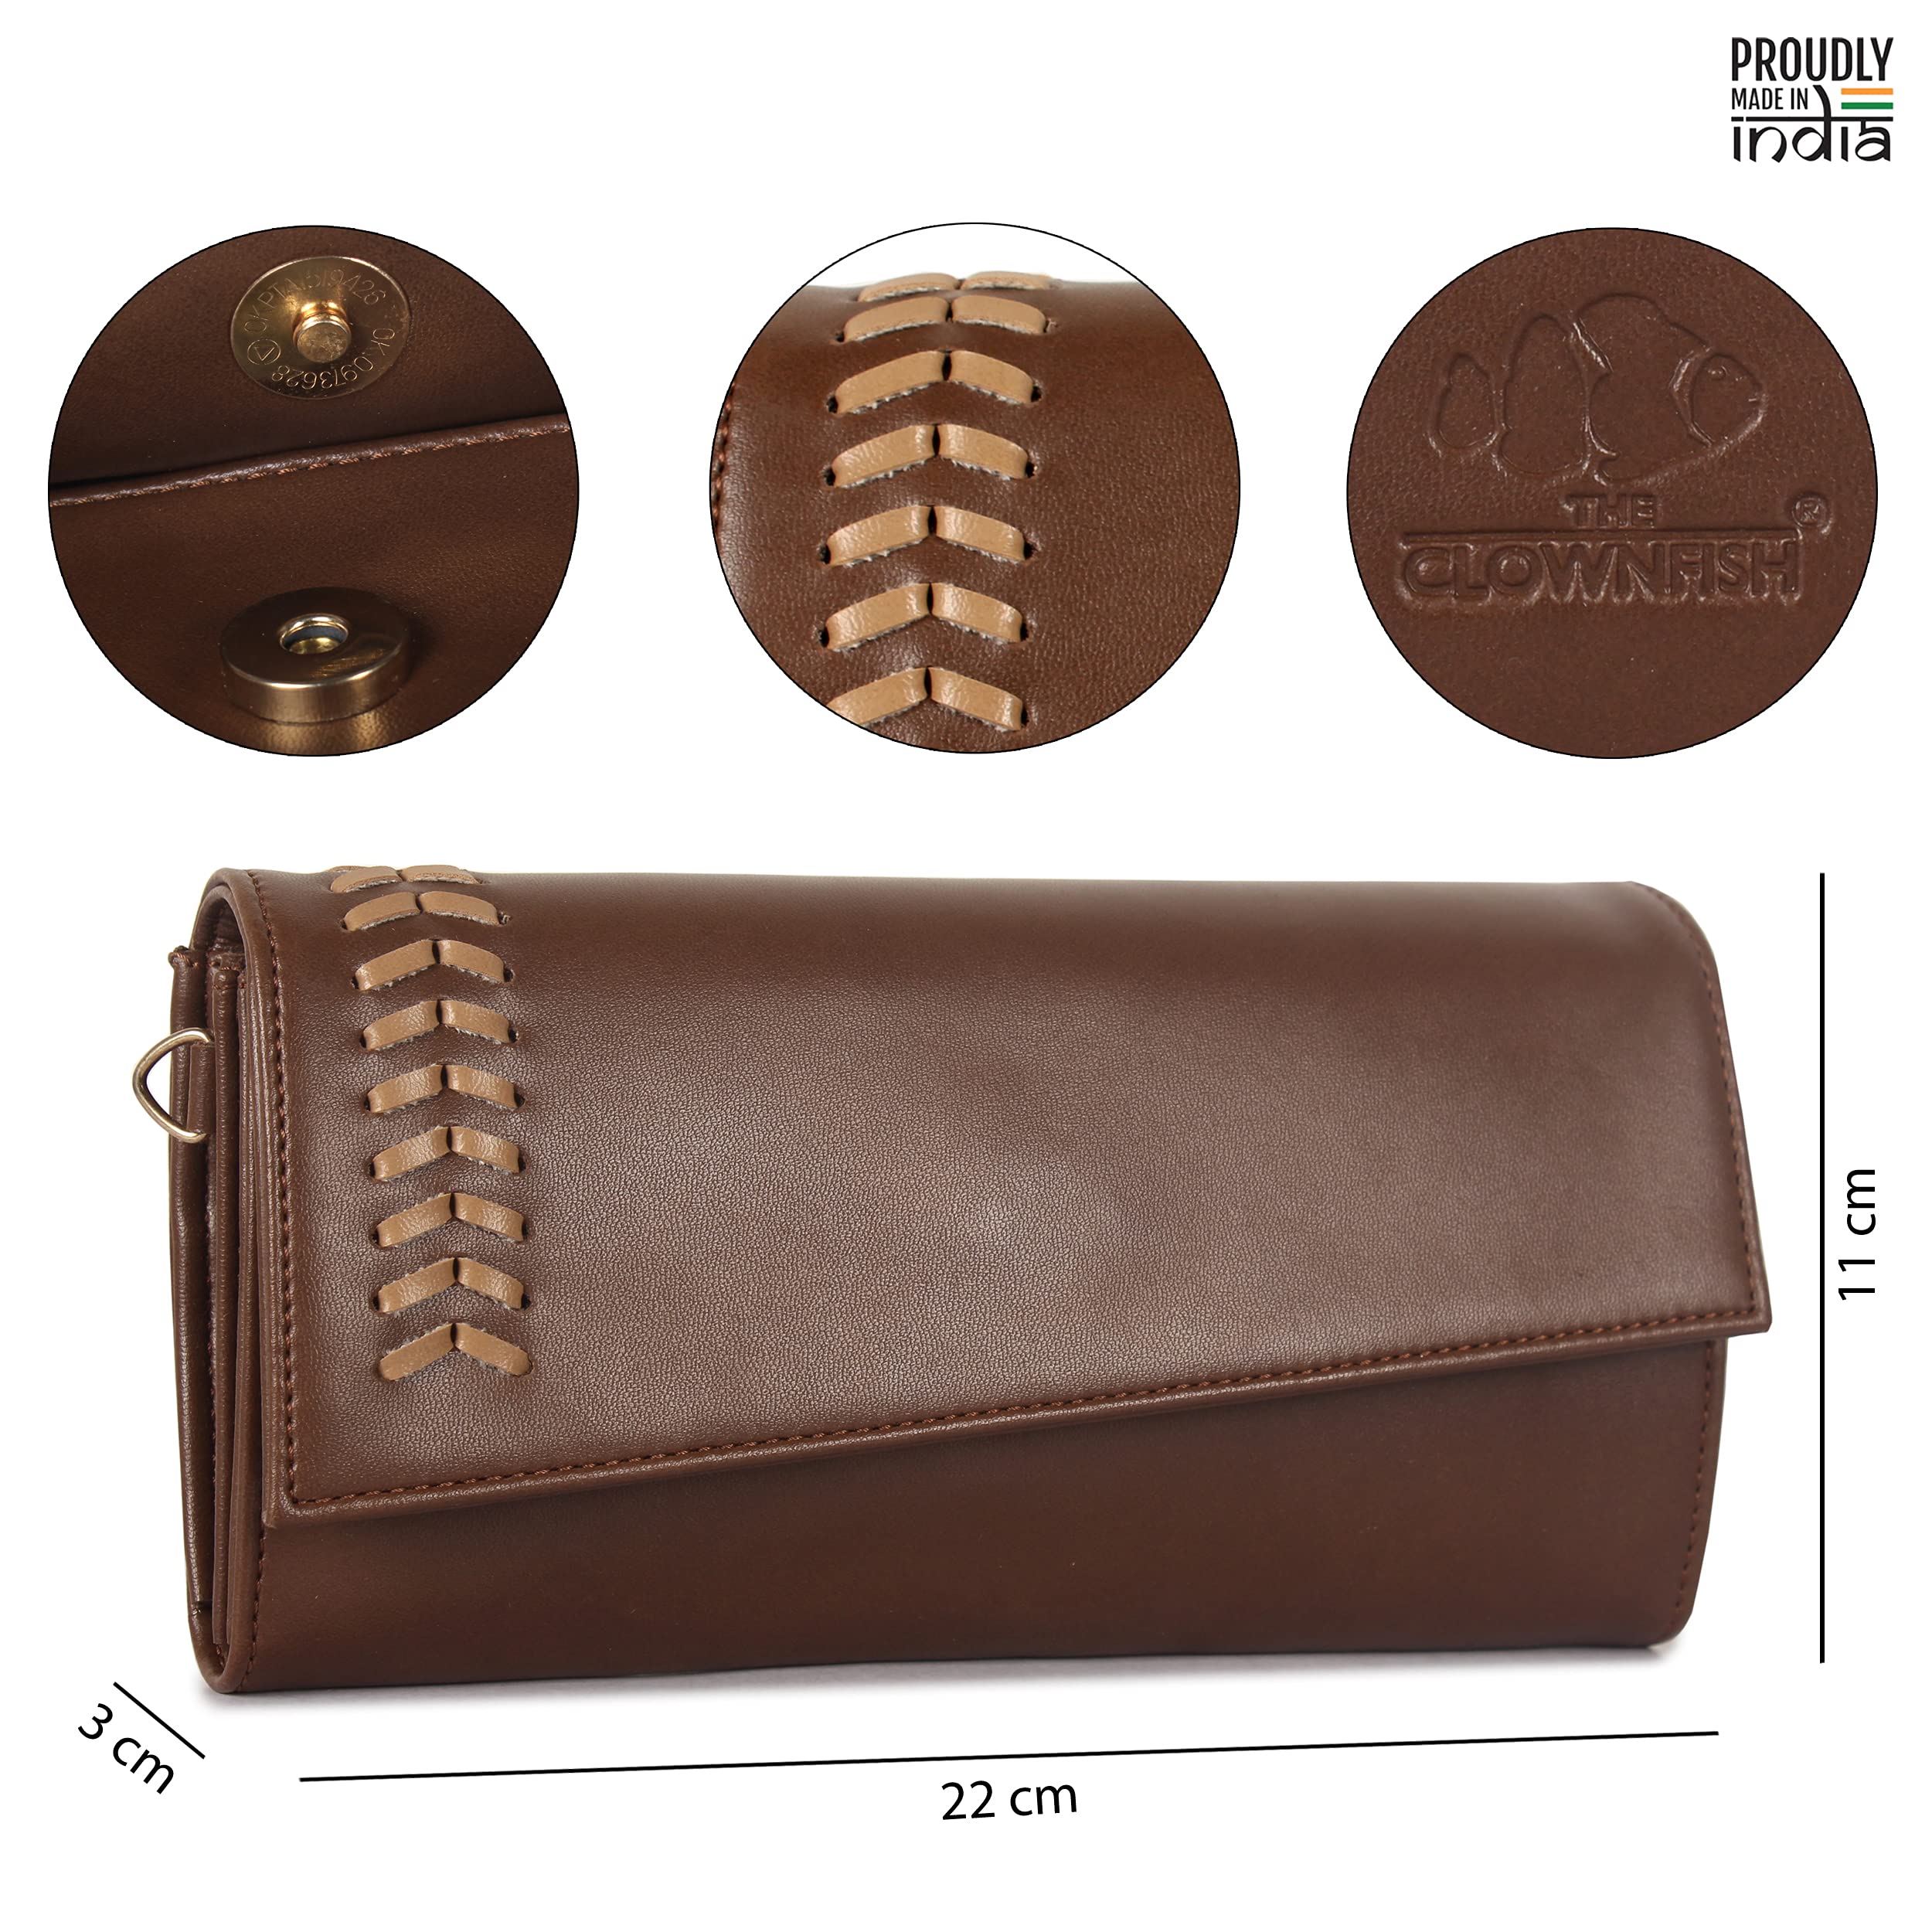 THE CLOWNFISH Myra Collection Womens Wallet Clutch Ladies Purse Sling Bag with Card slots (Brown)